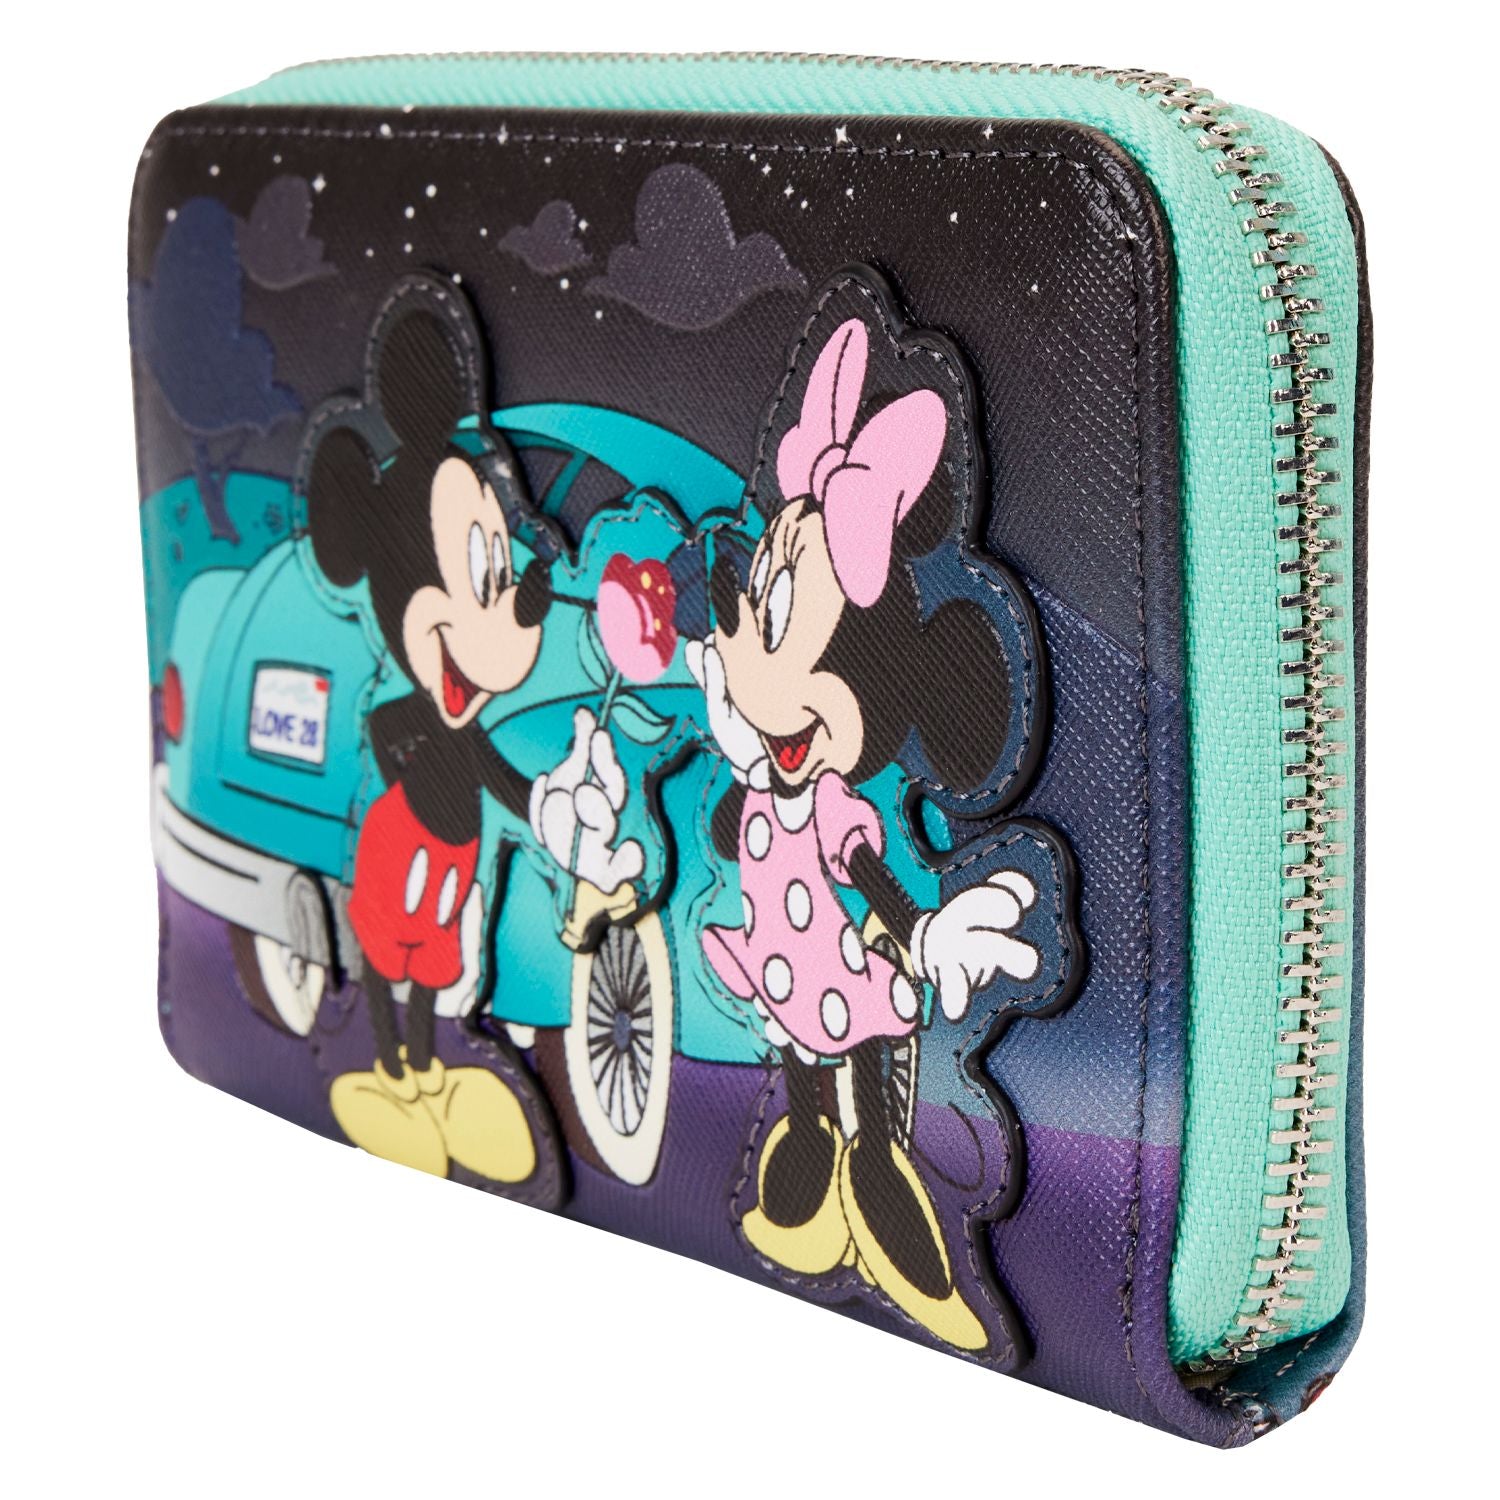 Loungefly DISNEY MICKEY AND MINNIE DATE NIGHT DRIVE-IN ZIP AROUND WALLET